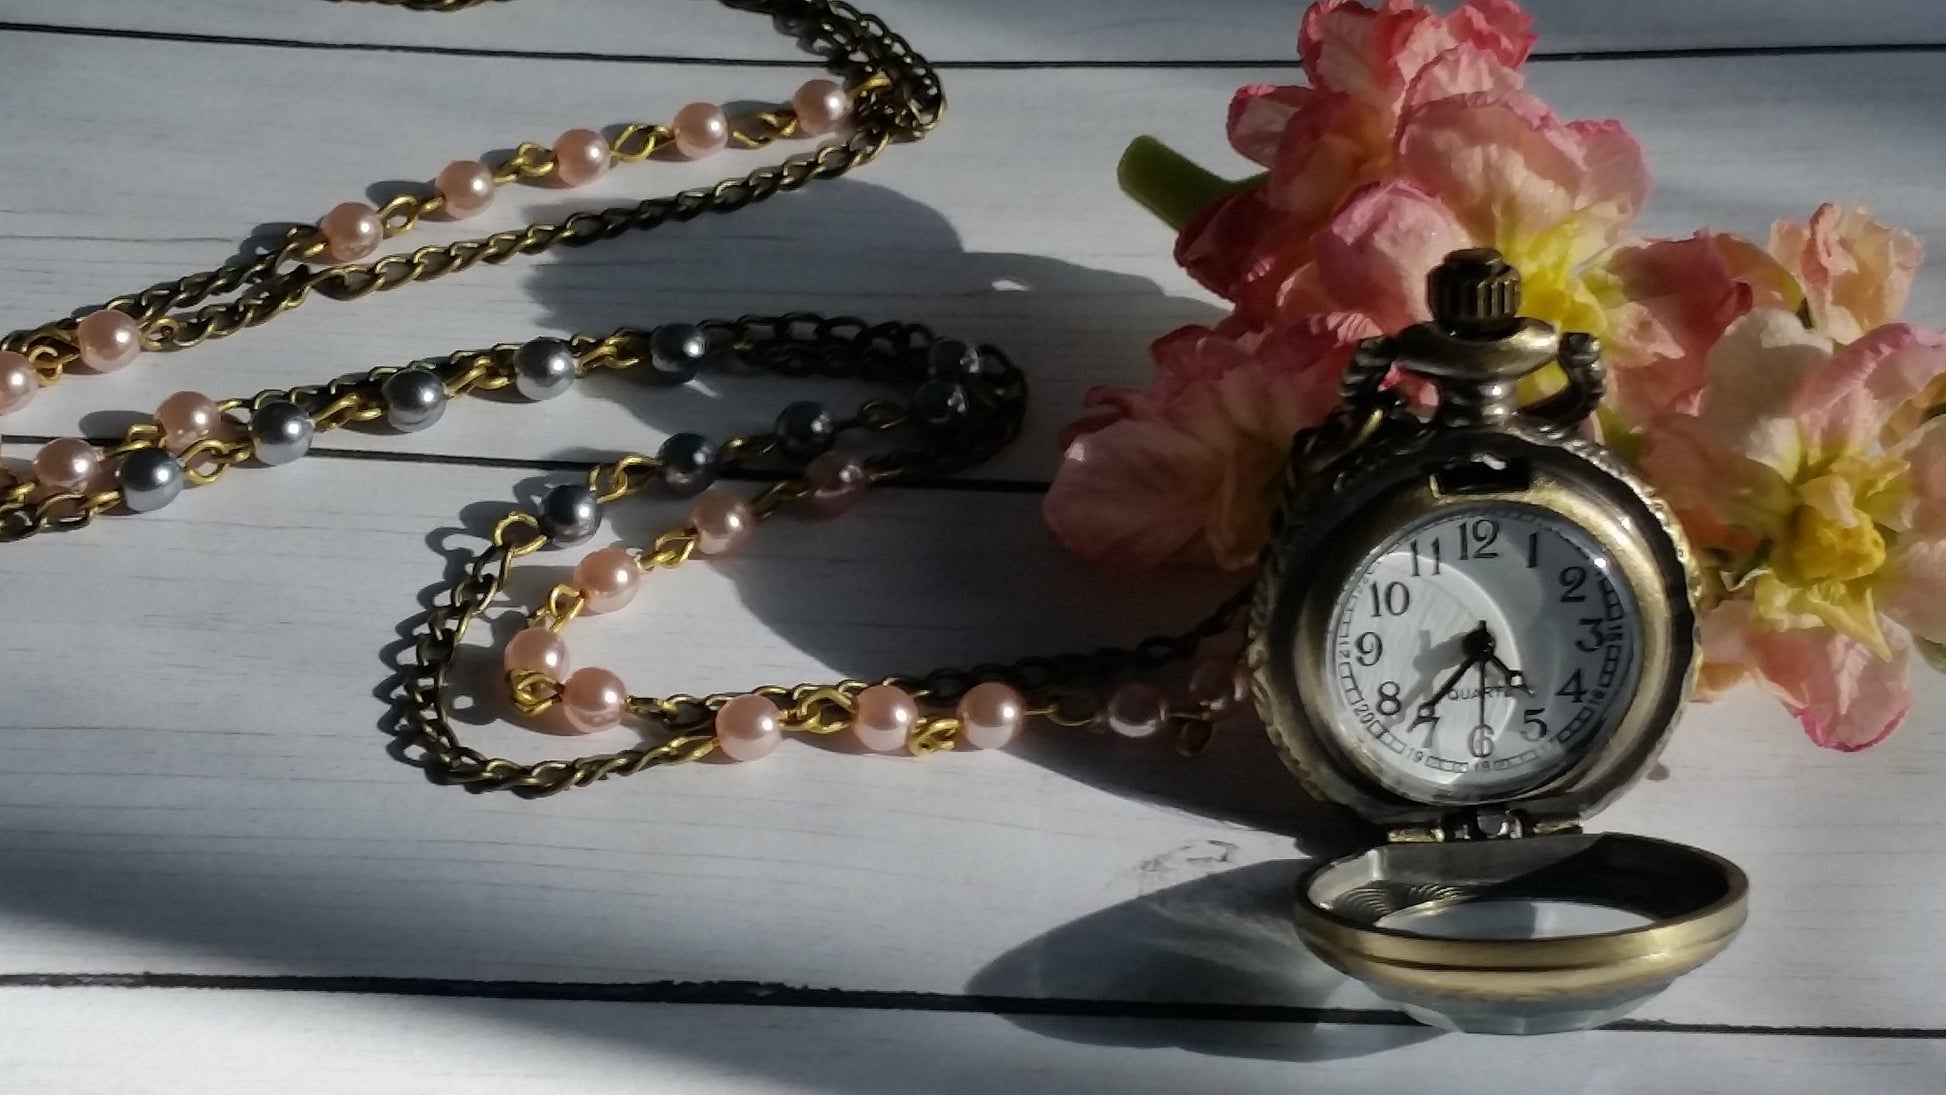 Ball Clock Necklace, Locket Necklace, Watch Necklace, Weddings, Victorian Watch Necklace, Beaded Chain, Free Shipping, Christmas in July